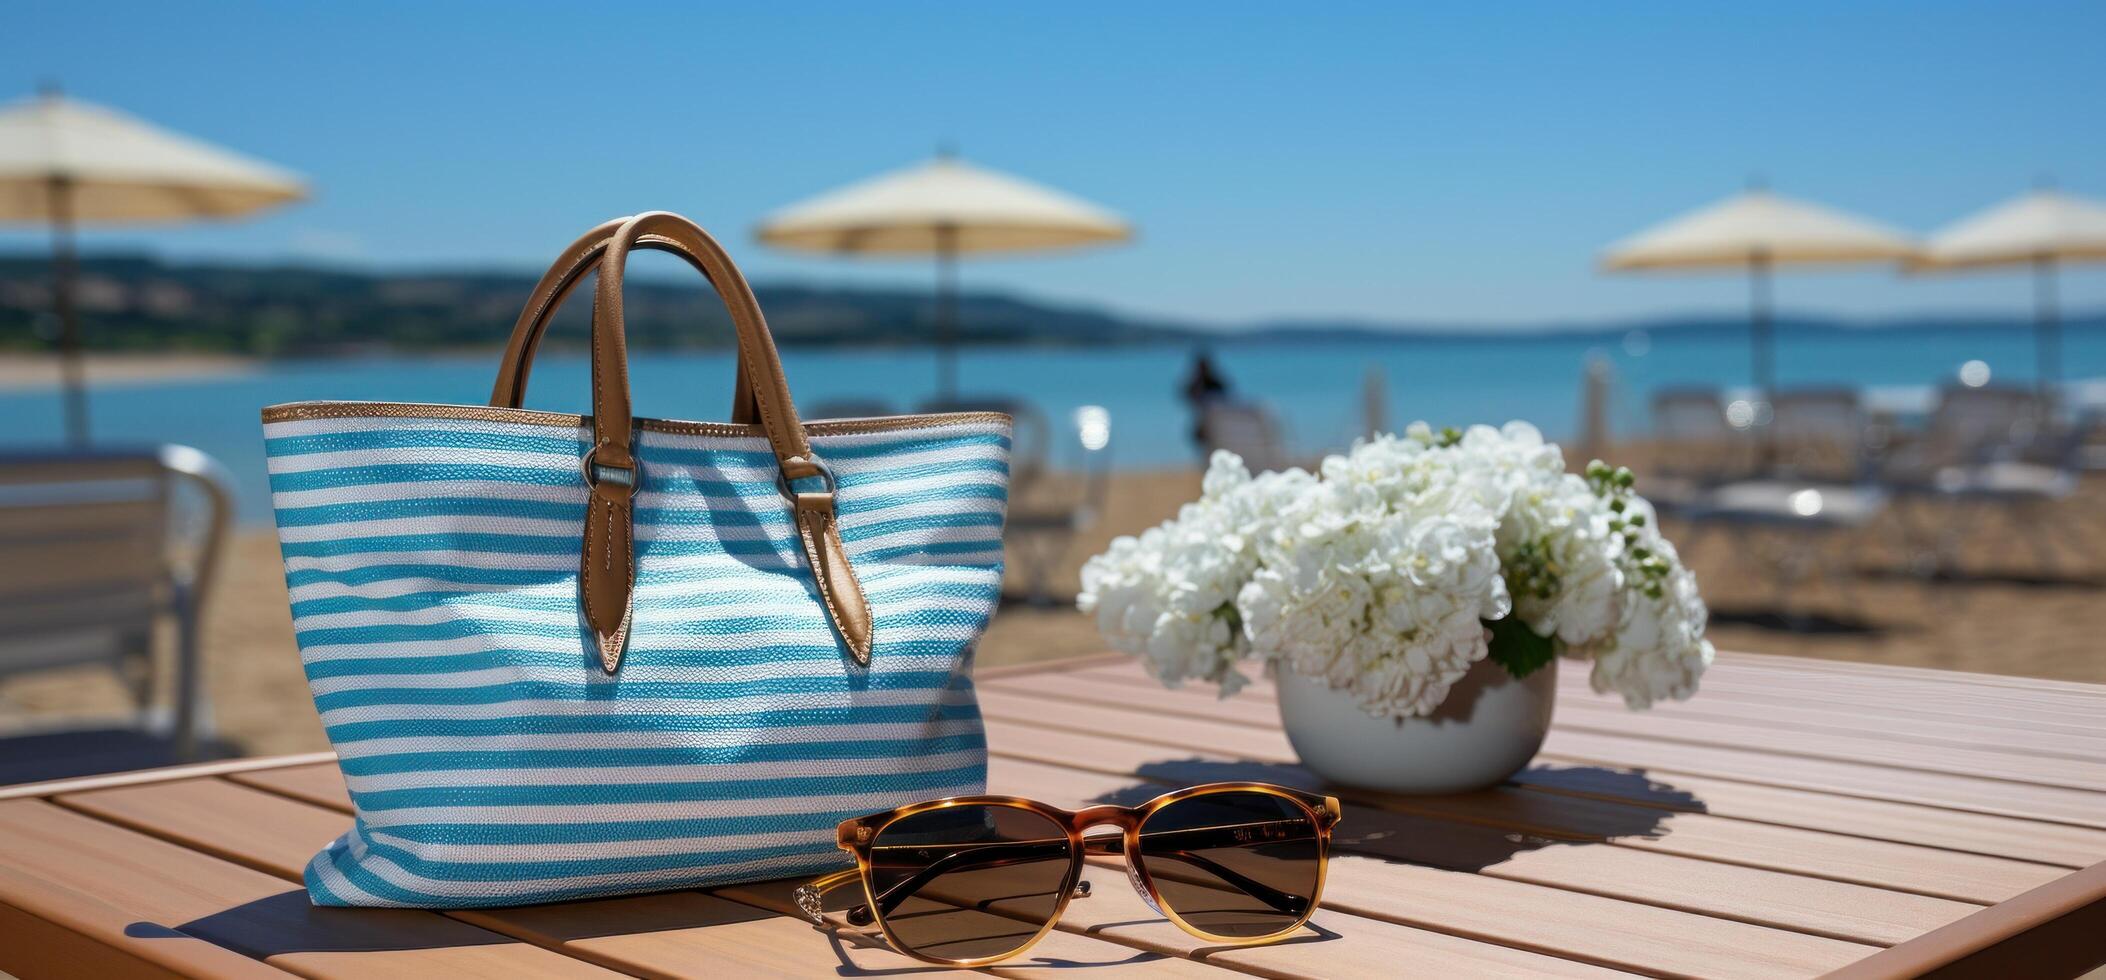 AI generated striped bag full of items and beach towels, photo